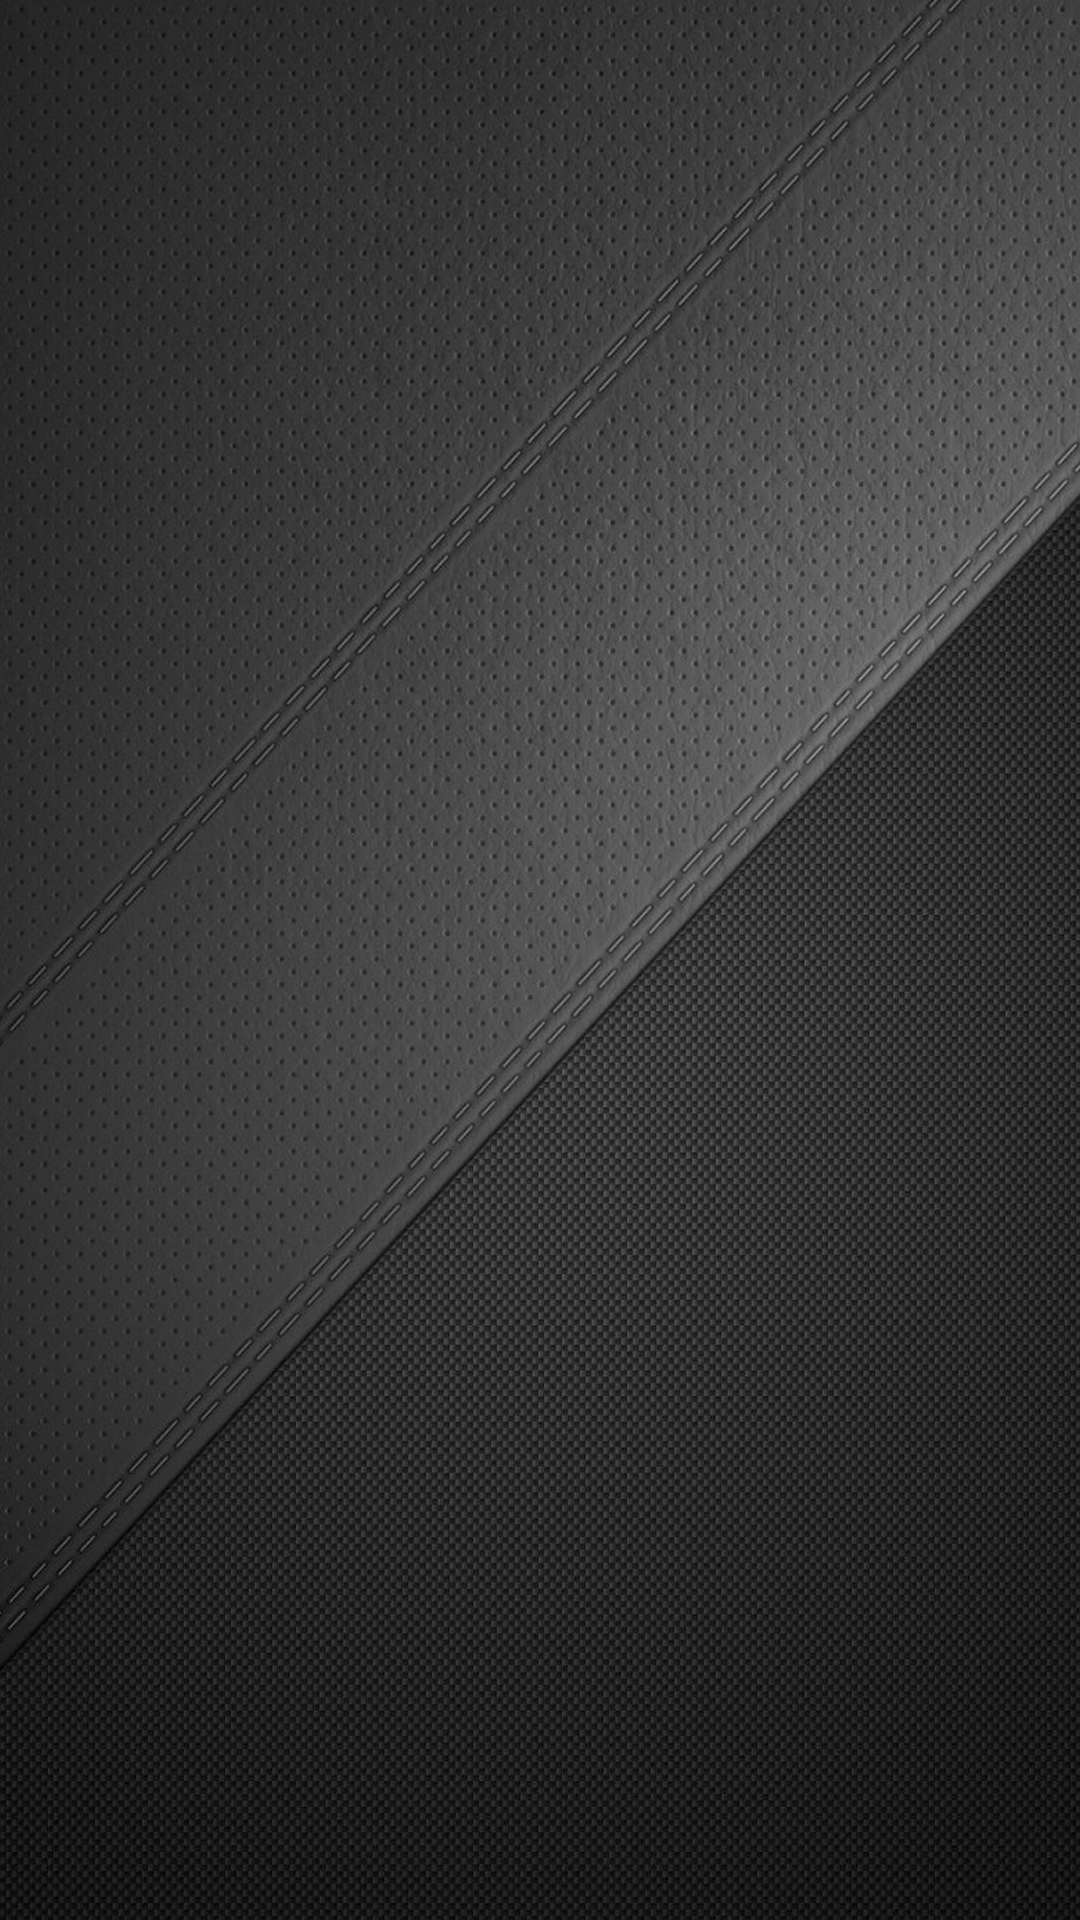 Perforated Leather Texture Dark Android Wallpaper